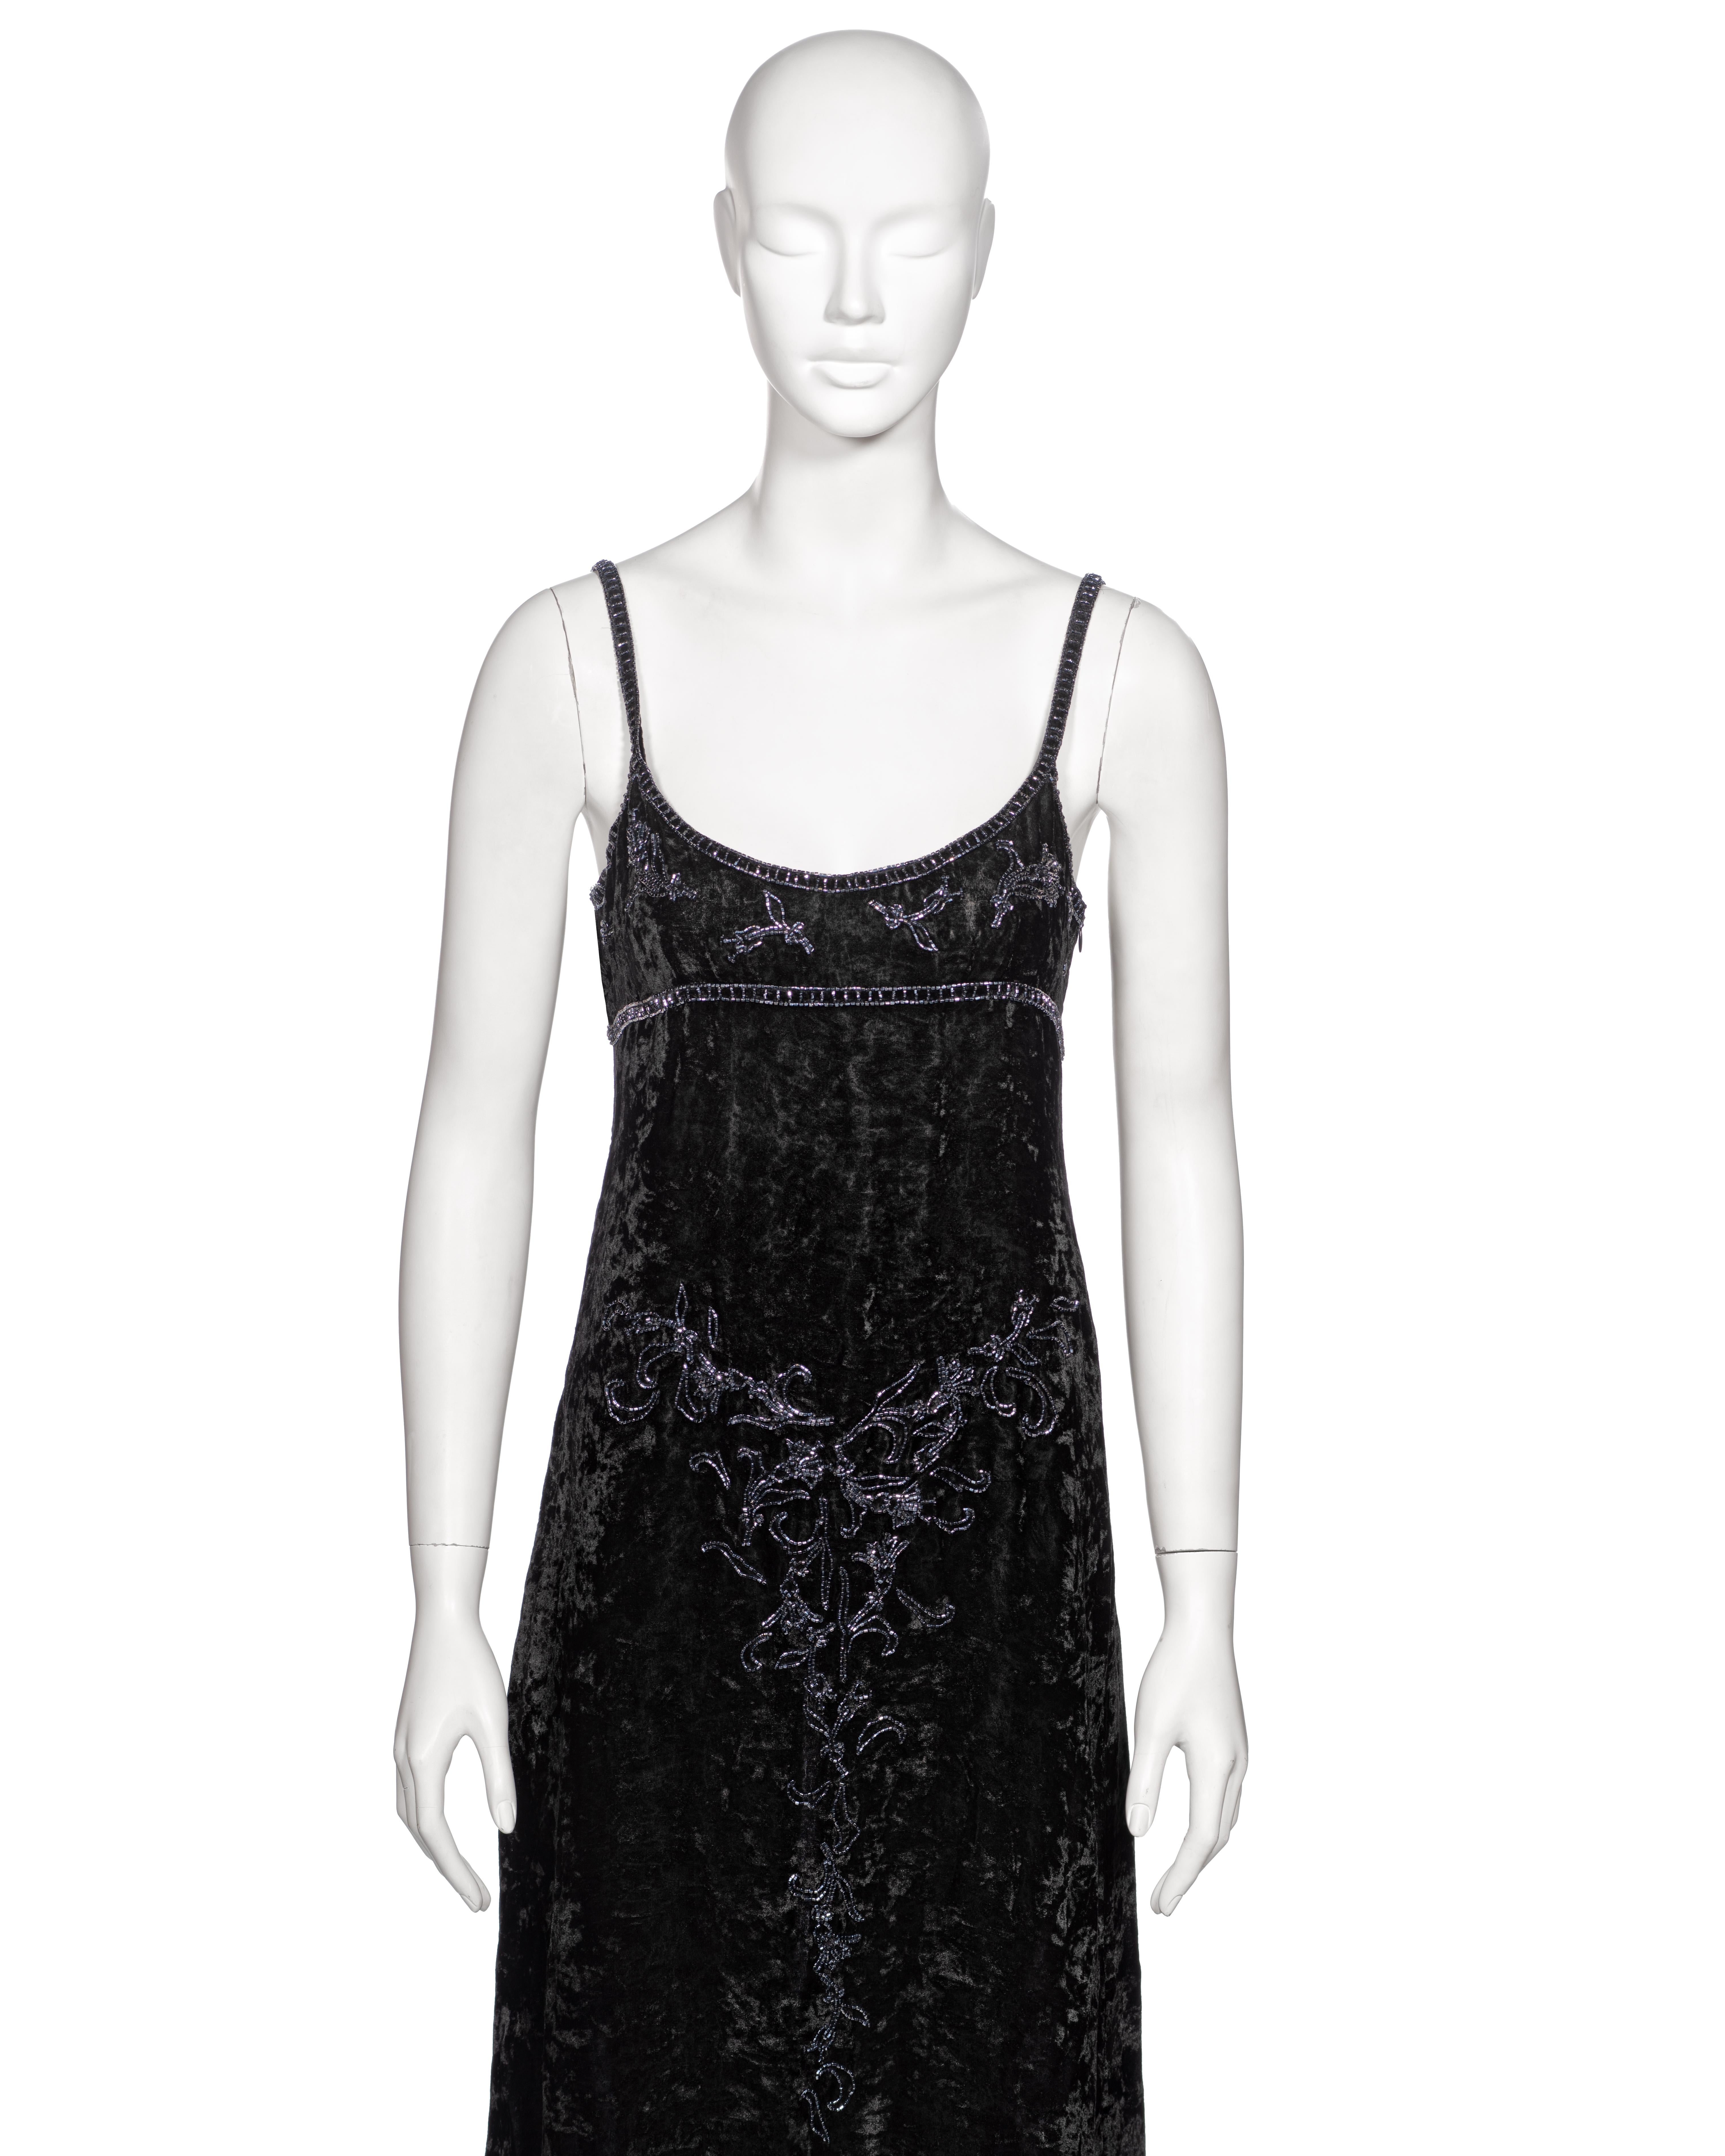 Prada by Miuccia Prada Black Crushed Velvet Bead Embroidered Slip Dress, fw 1997 In Good Condition For Sale In London, GB